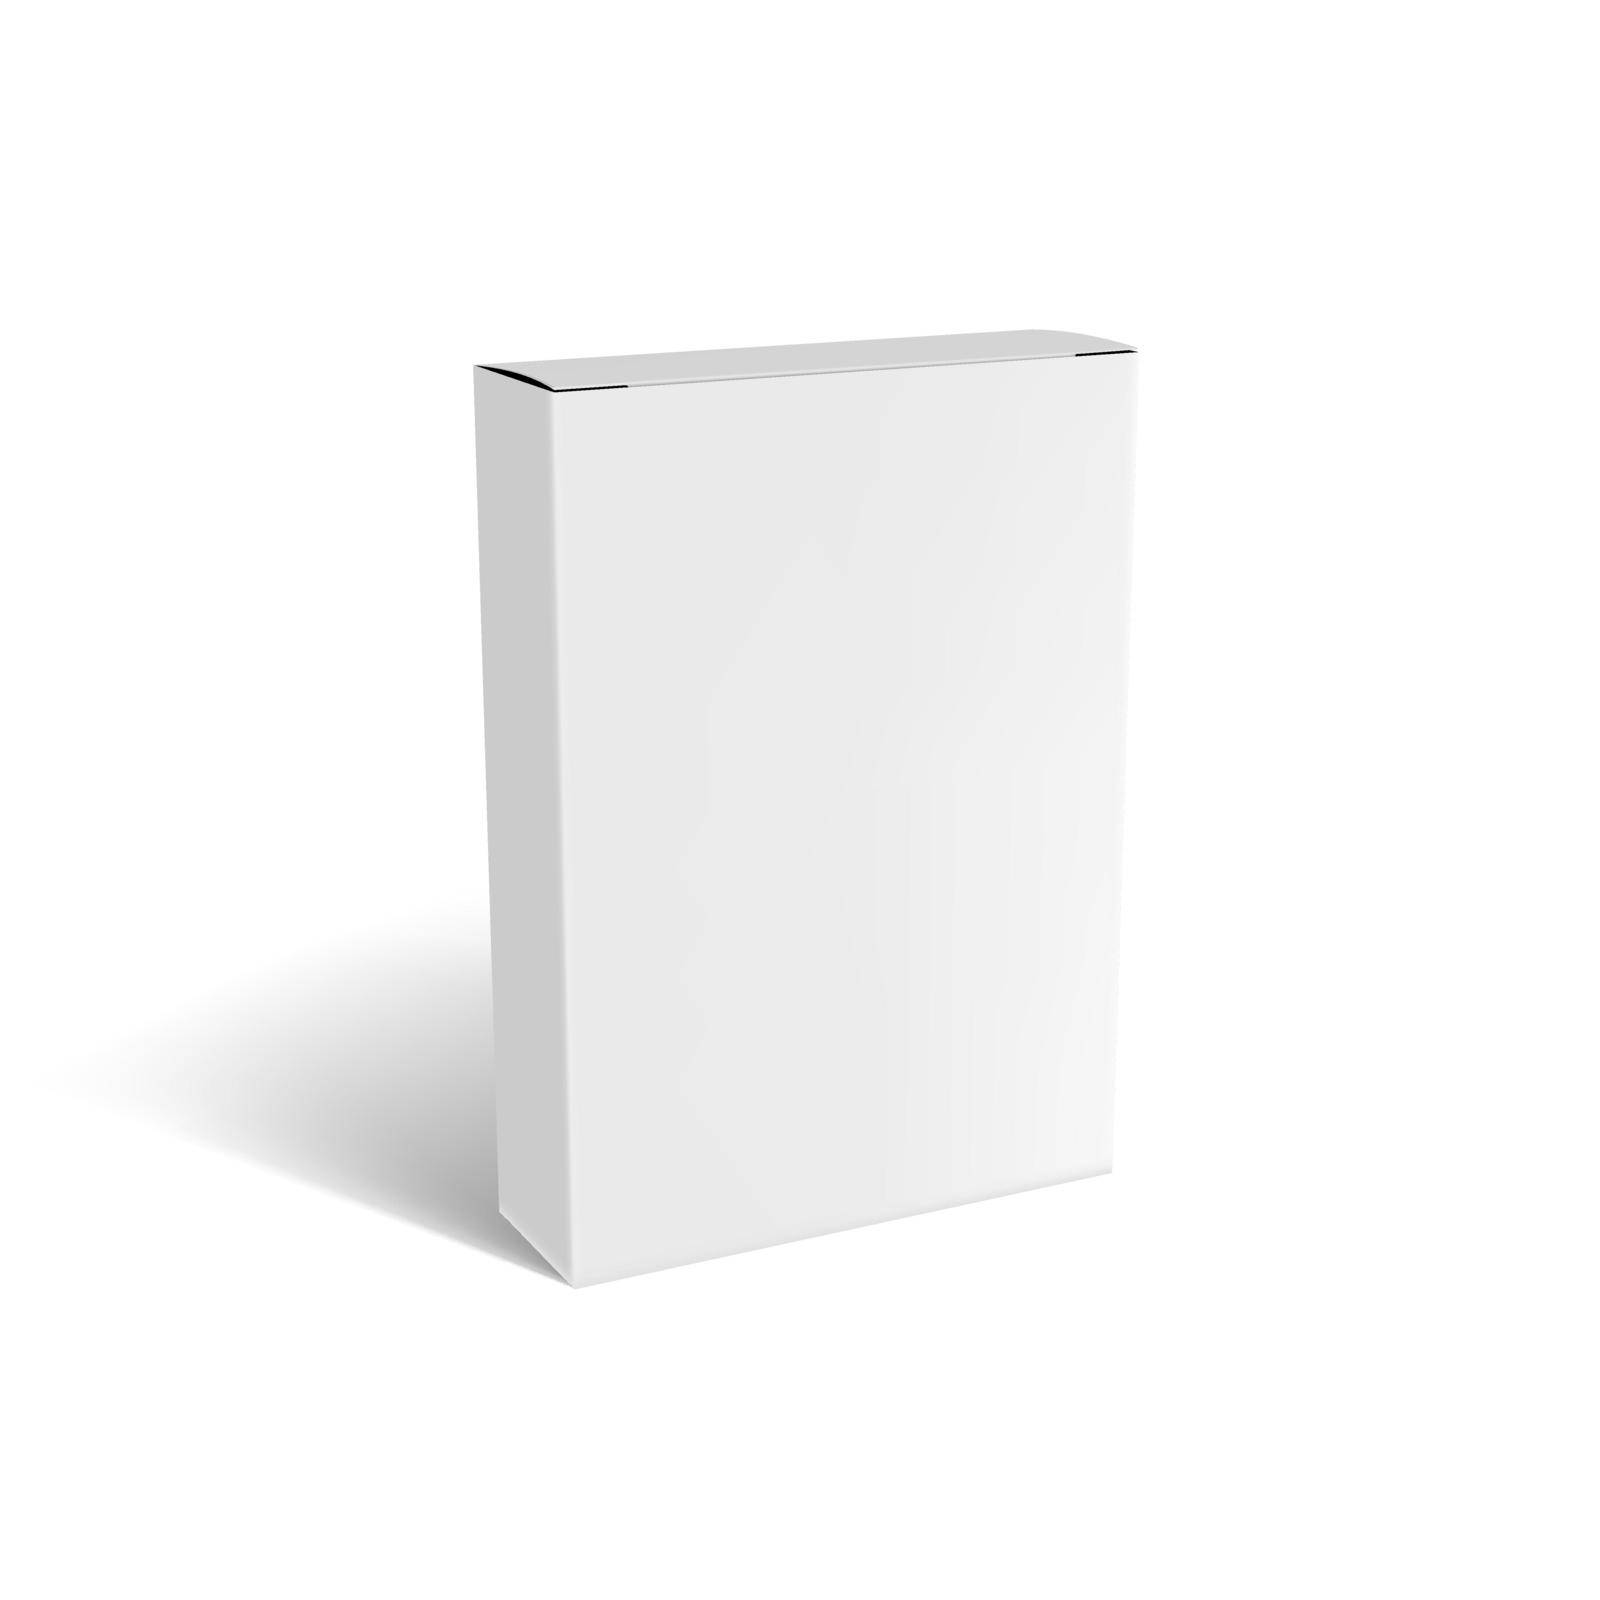 3D White Box Mock Up Packiging With Shadow by VectorThings